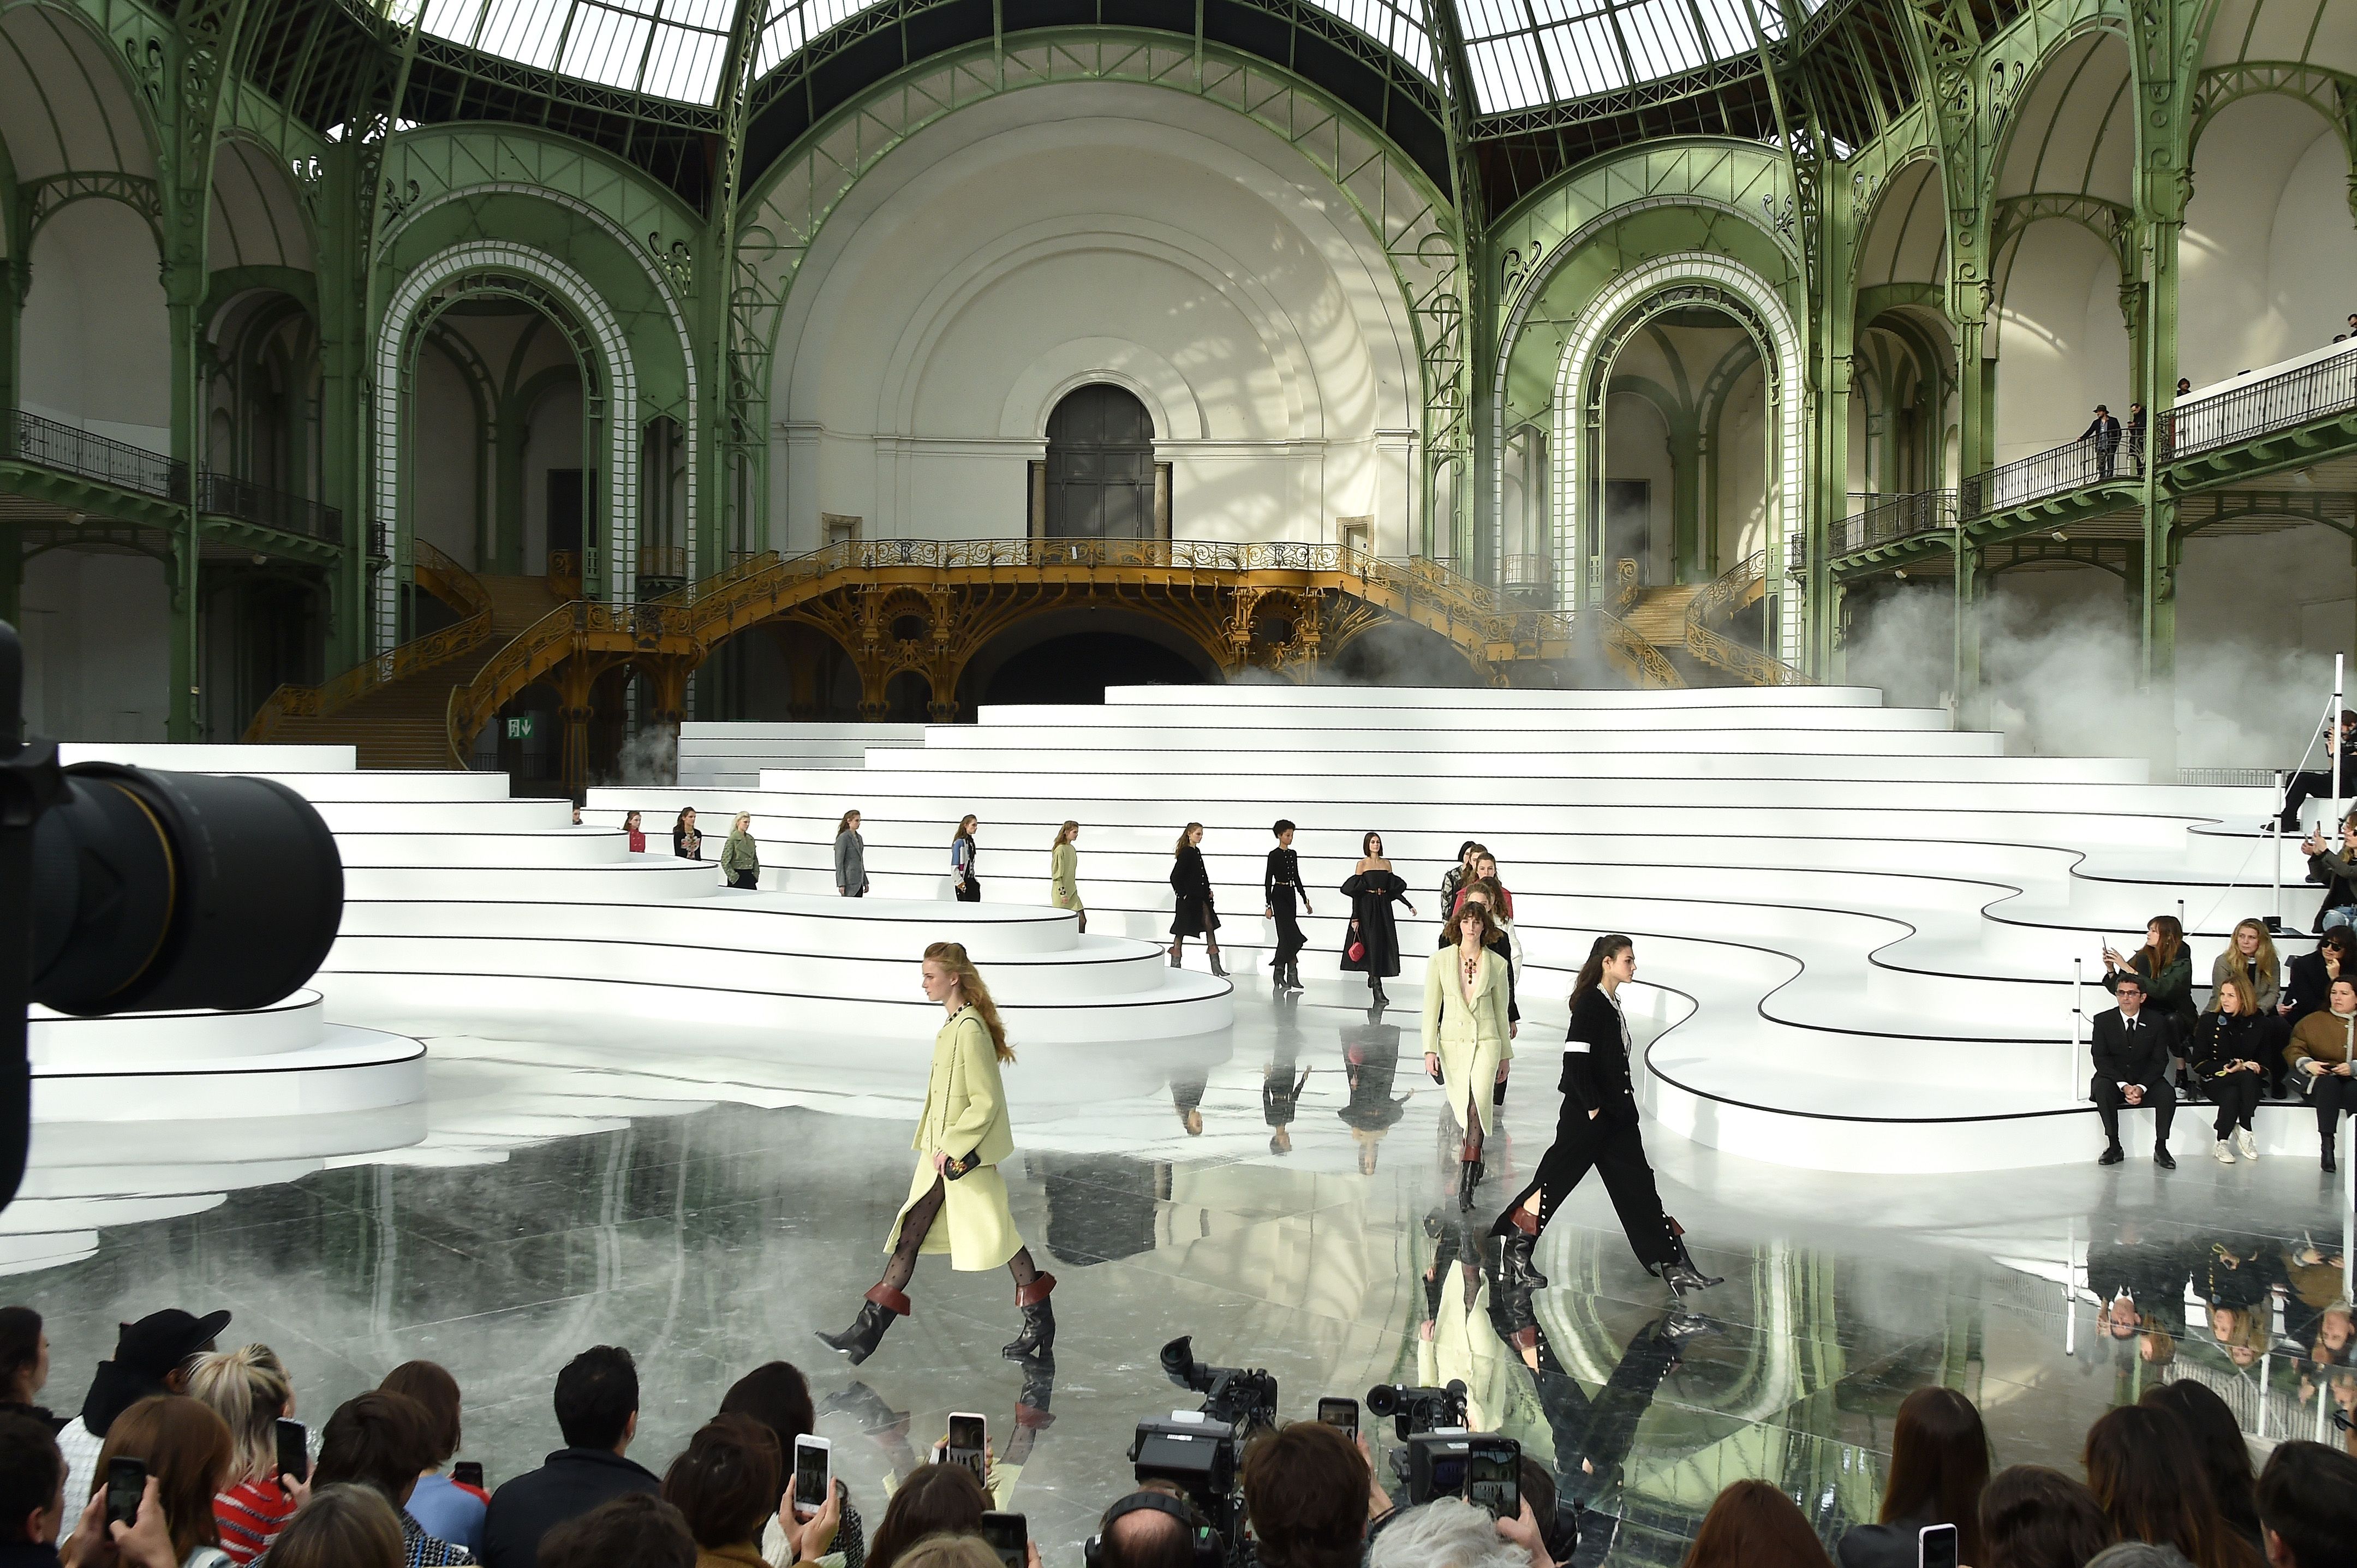 Chanel will contribute 25 million to help renovate the Grand Palais